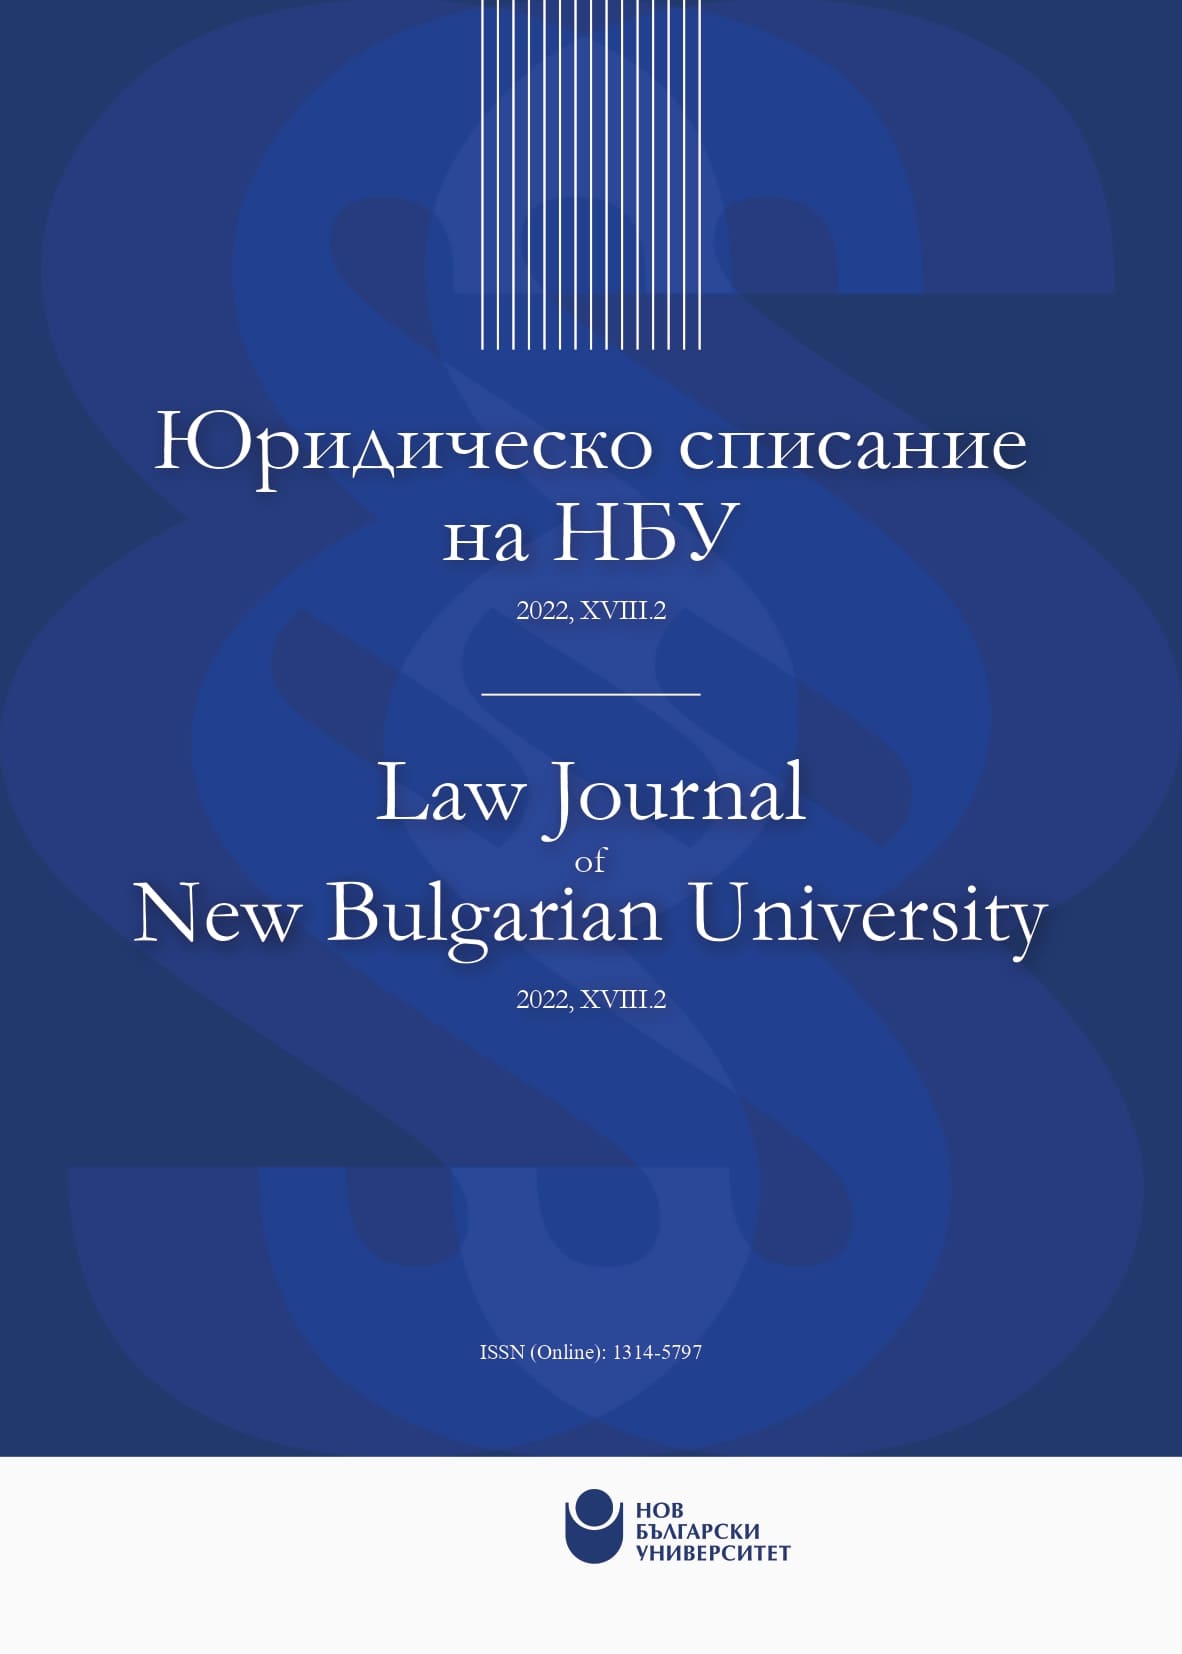 					View Vol. 18 No. 2 (2022): Law Journal of New Bulgarian University
				